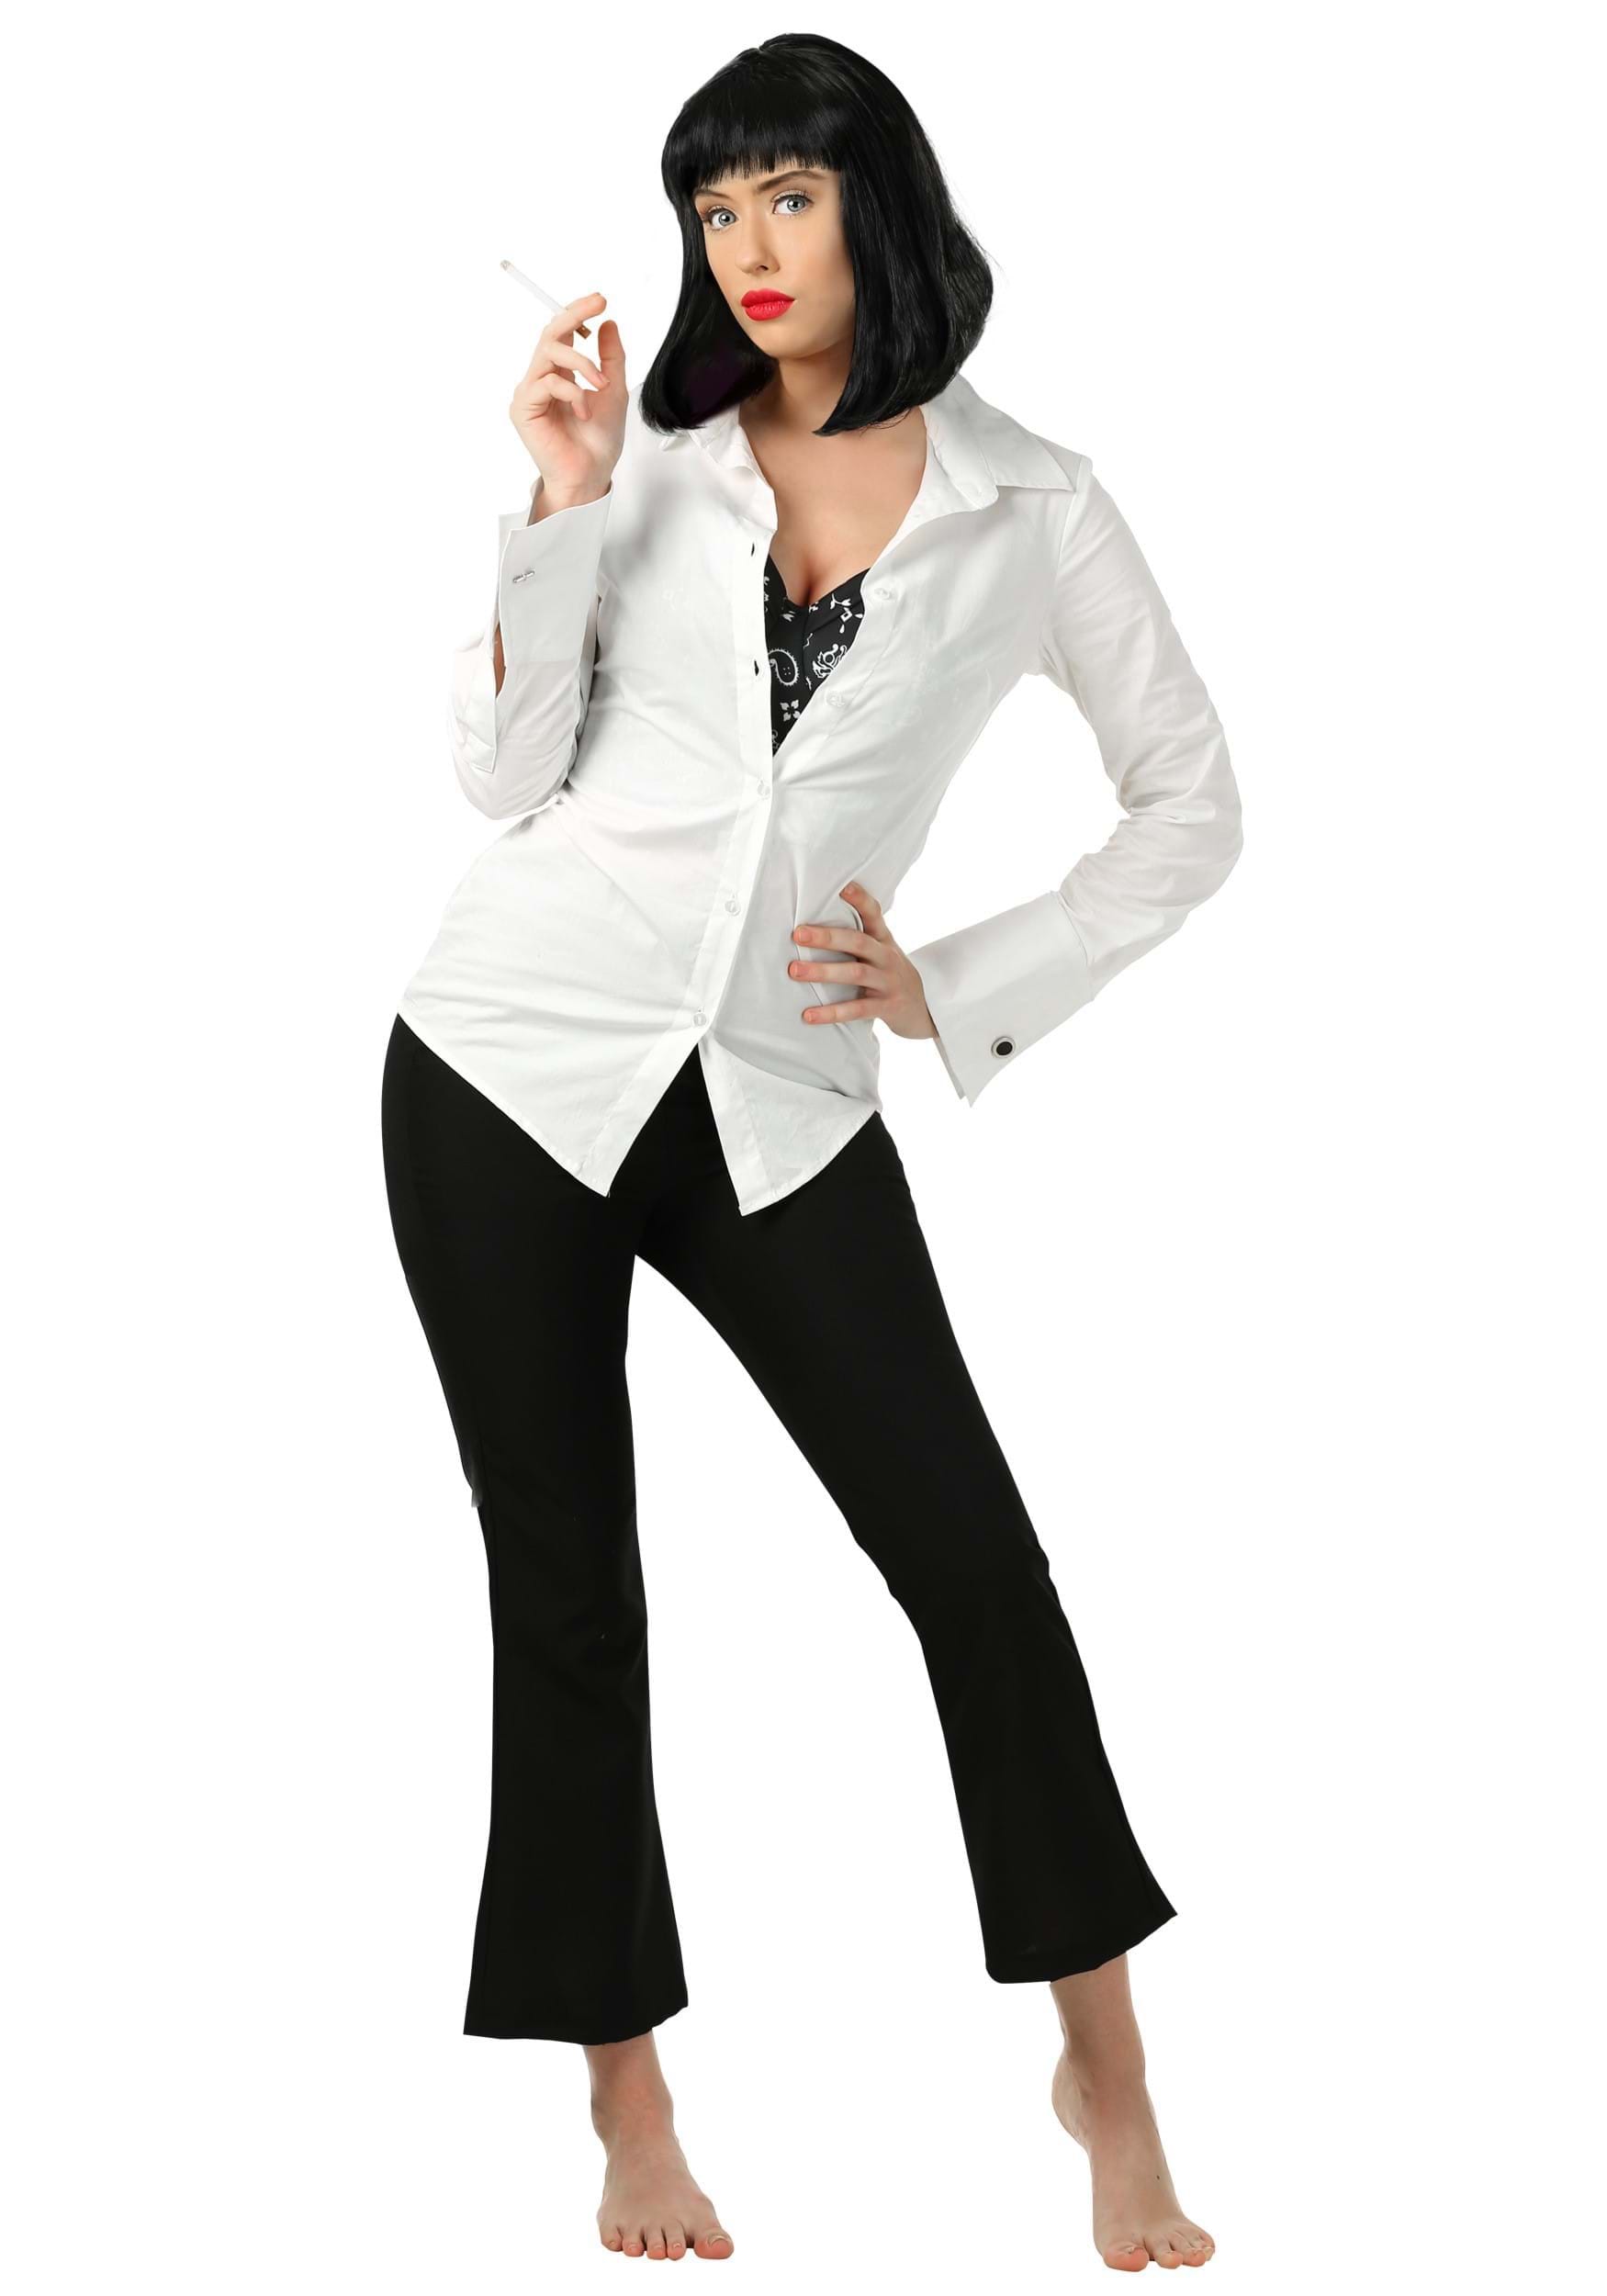 Image of Mia Wallace Pulp Fiction Costume for Women ID FUN6636AD-XS